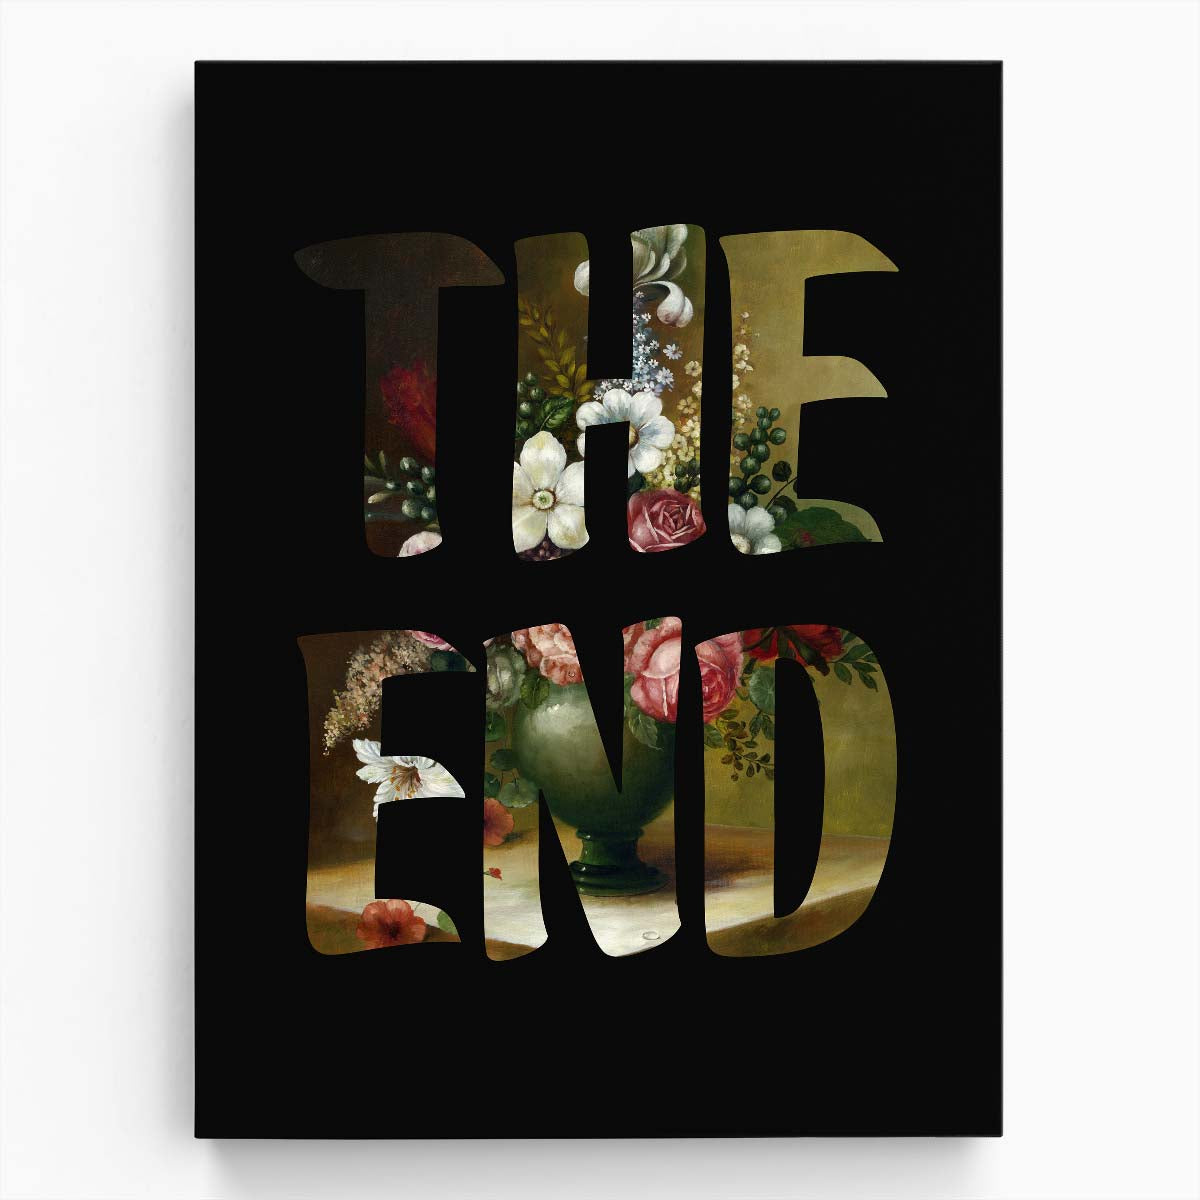 THE END Floral Dark Oil Painting Illustration by Famous When Dead by Luxuriance Designs, made in USA